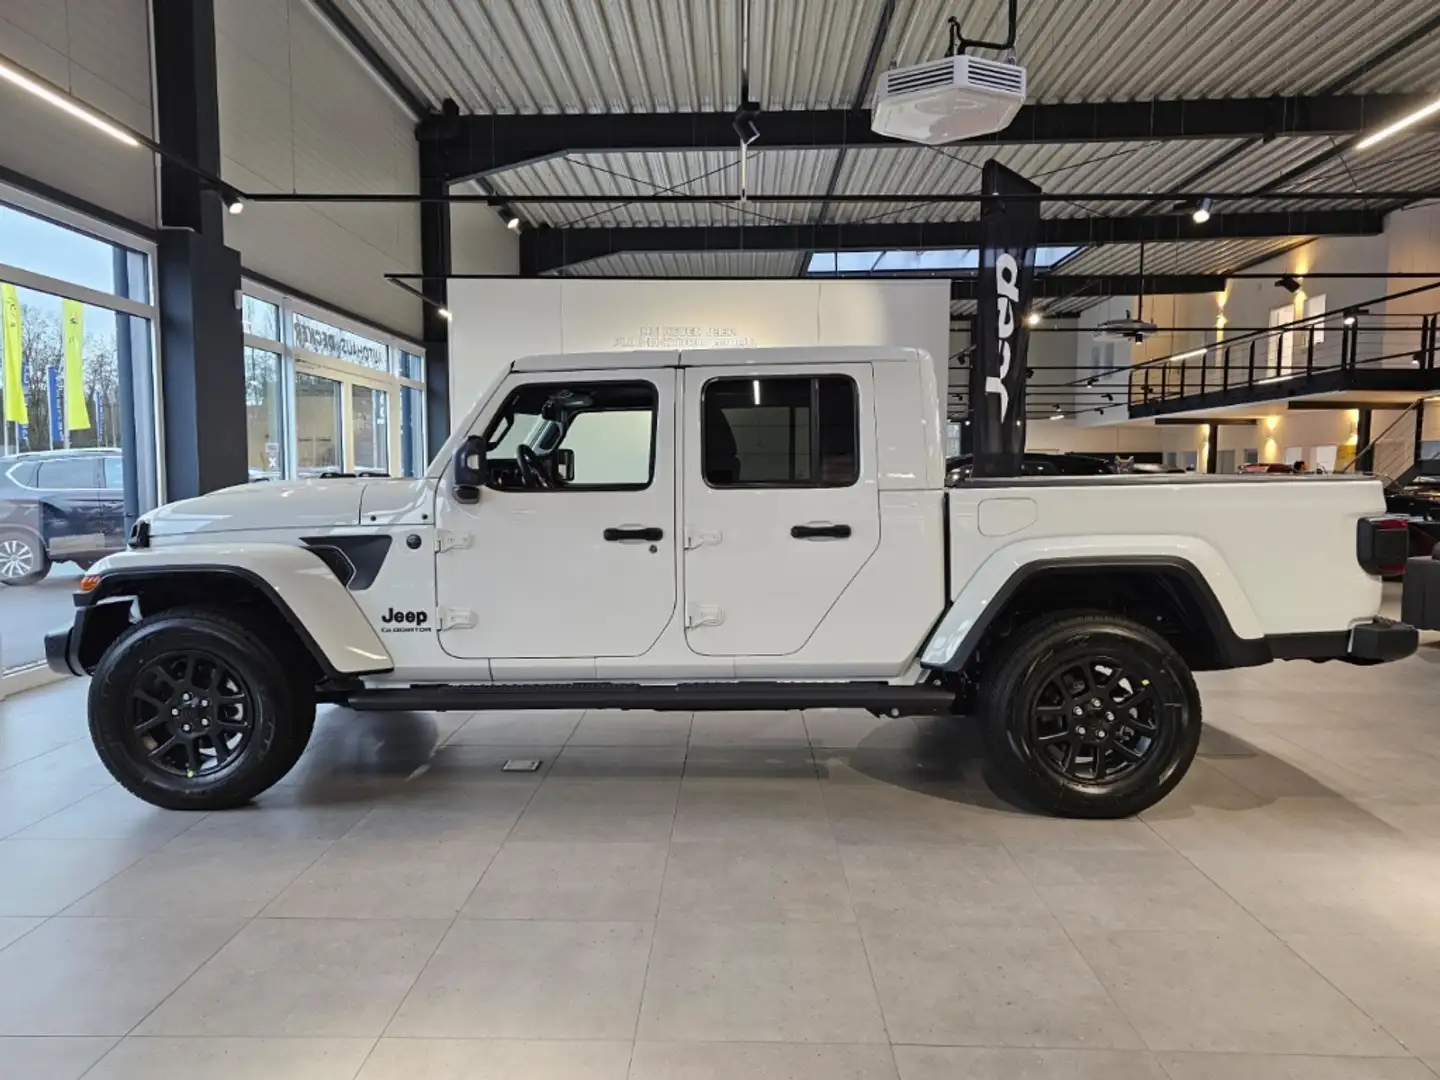 Jeep Gladiator Farout Final Edition  4WD 3.0 V6 261 PS EU6d Blanc - 2